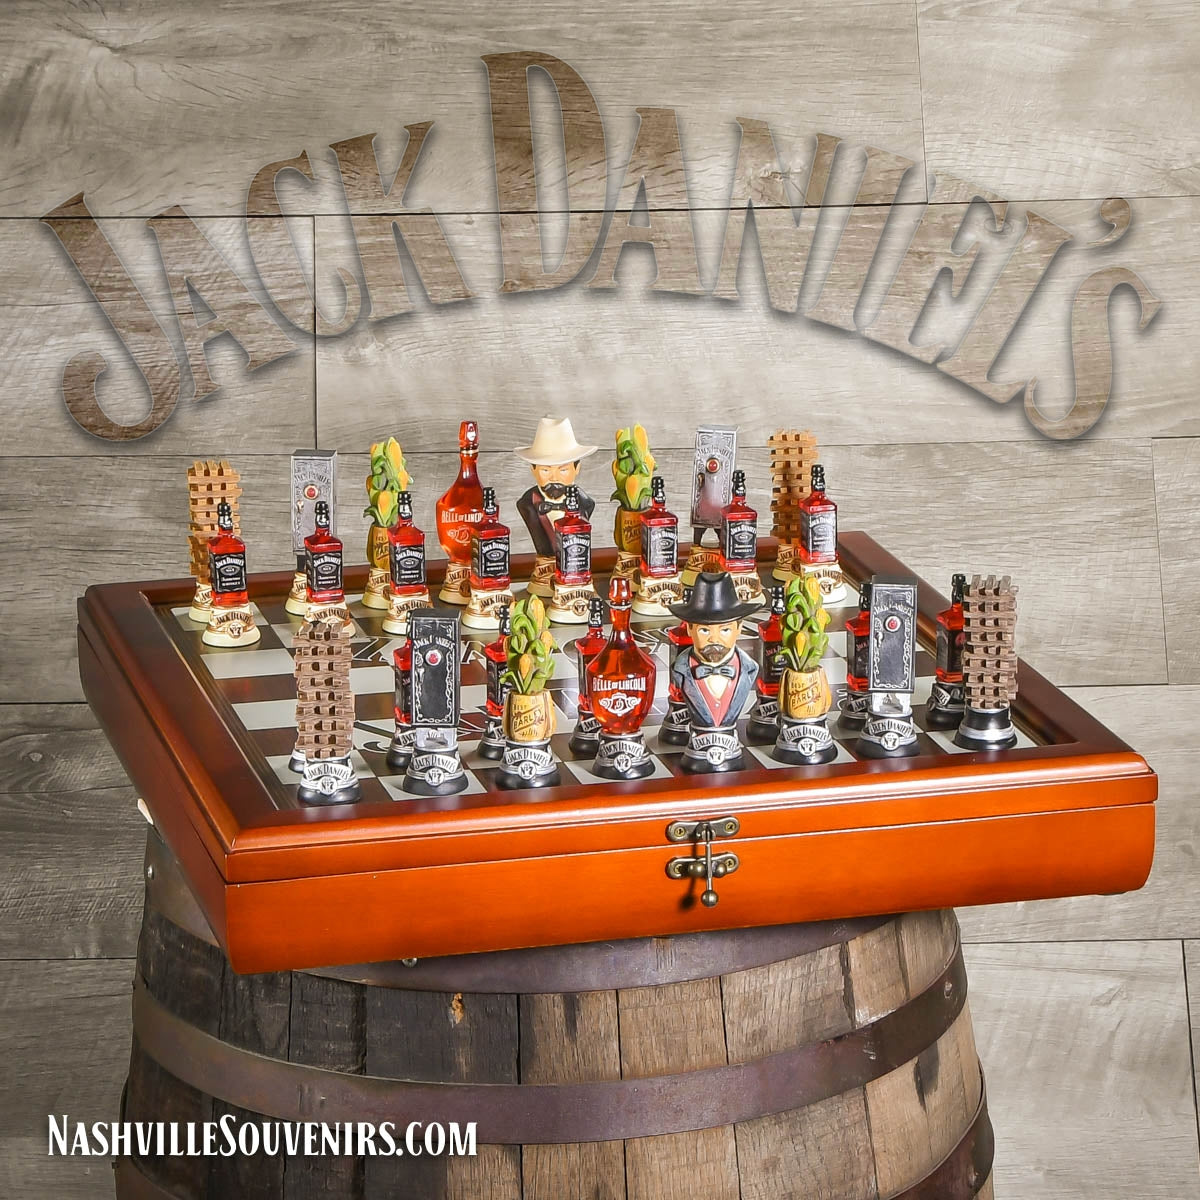 The ultimate Gift for Jack Daniel's Lovers! Beautiful Jack Daniel's Chess Set. Buy now with FREE SHIPPING! Each playing piece represents a piece of Jack Daniel's History.